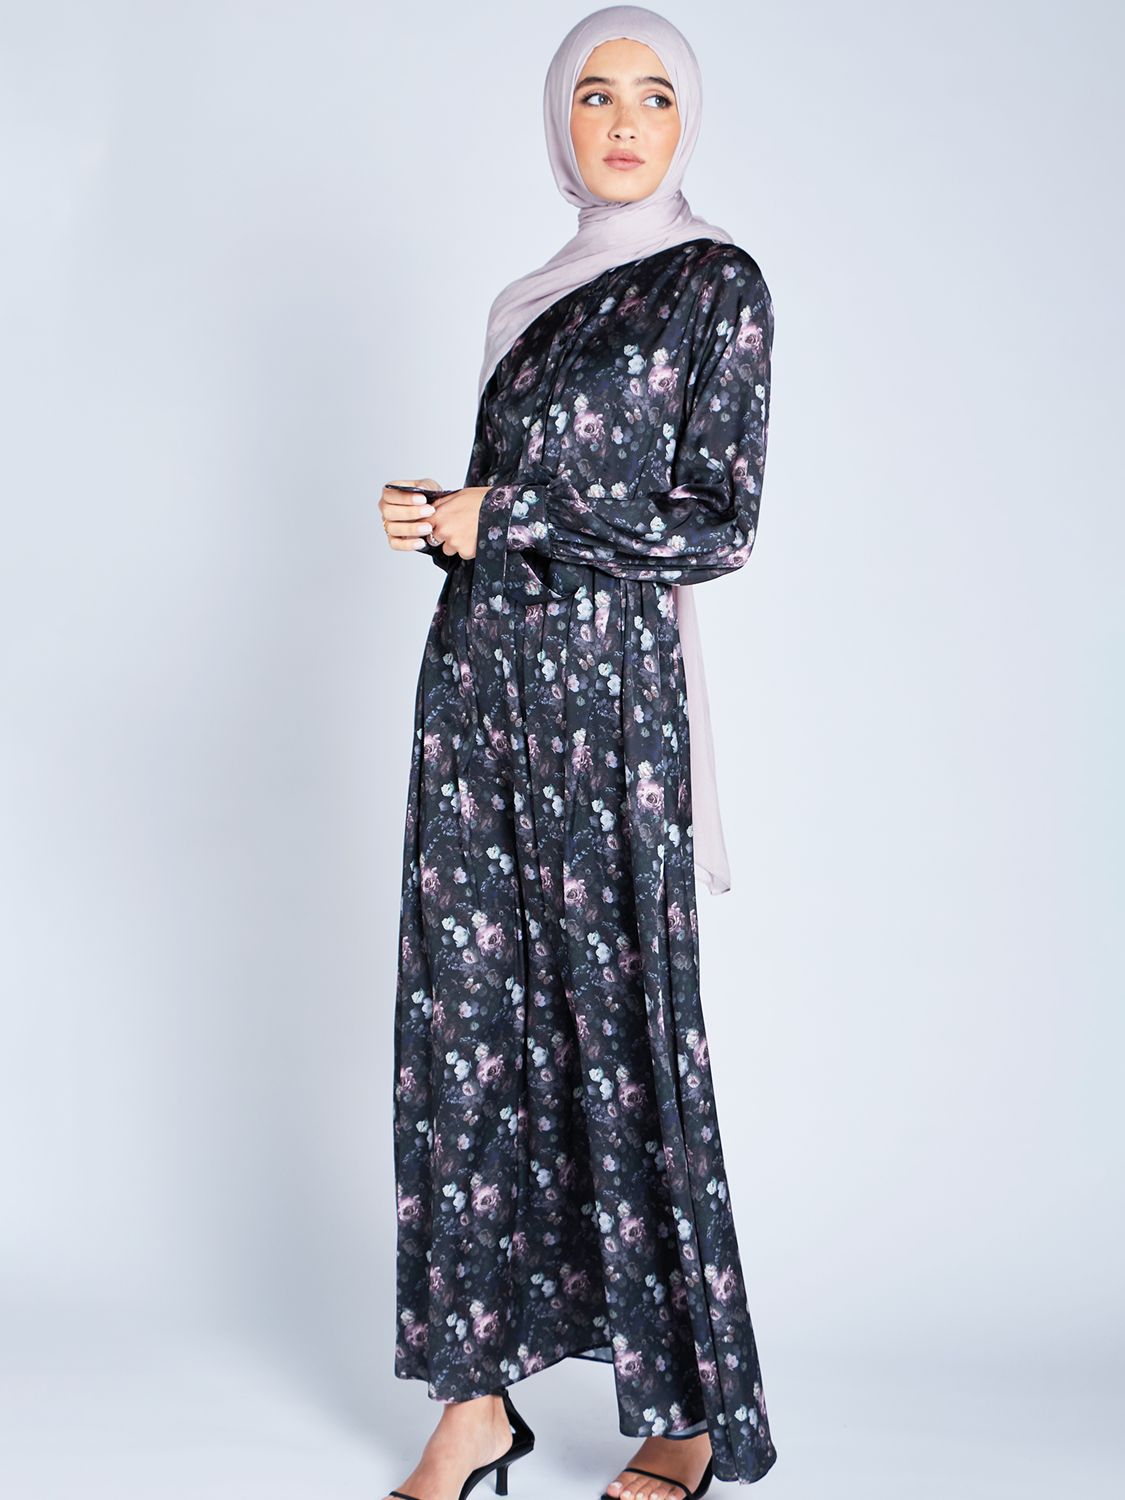 Modest Clothing for Women High Neck Long Dresses with Sleeves